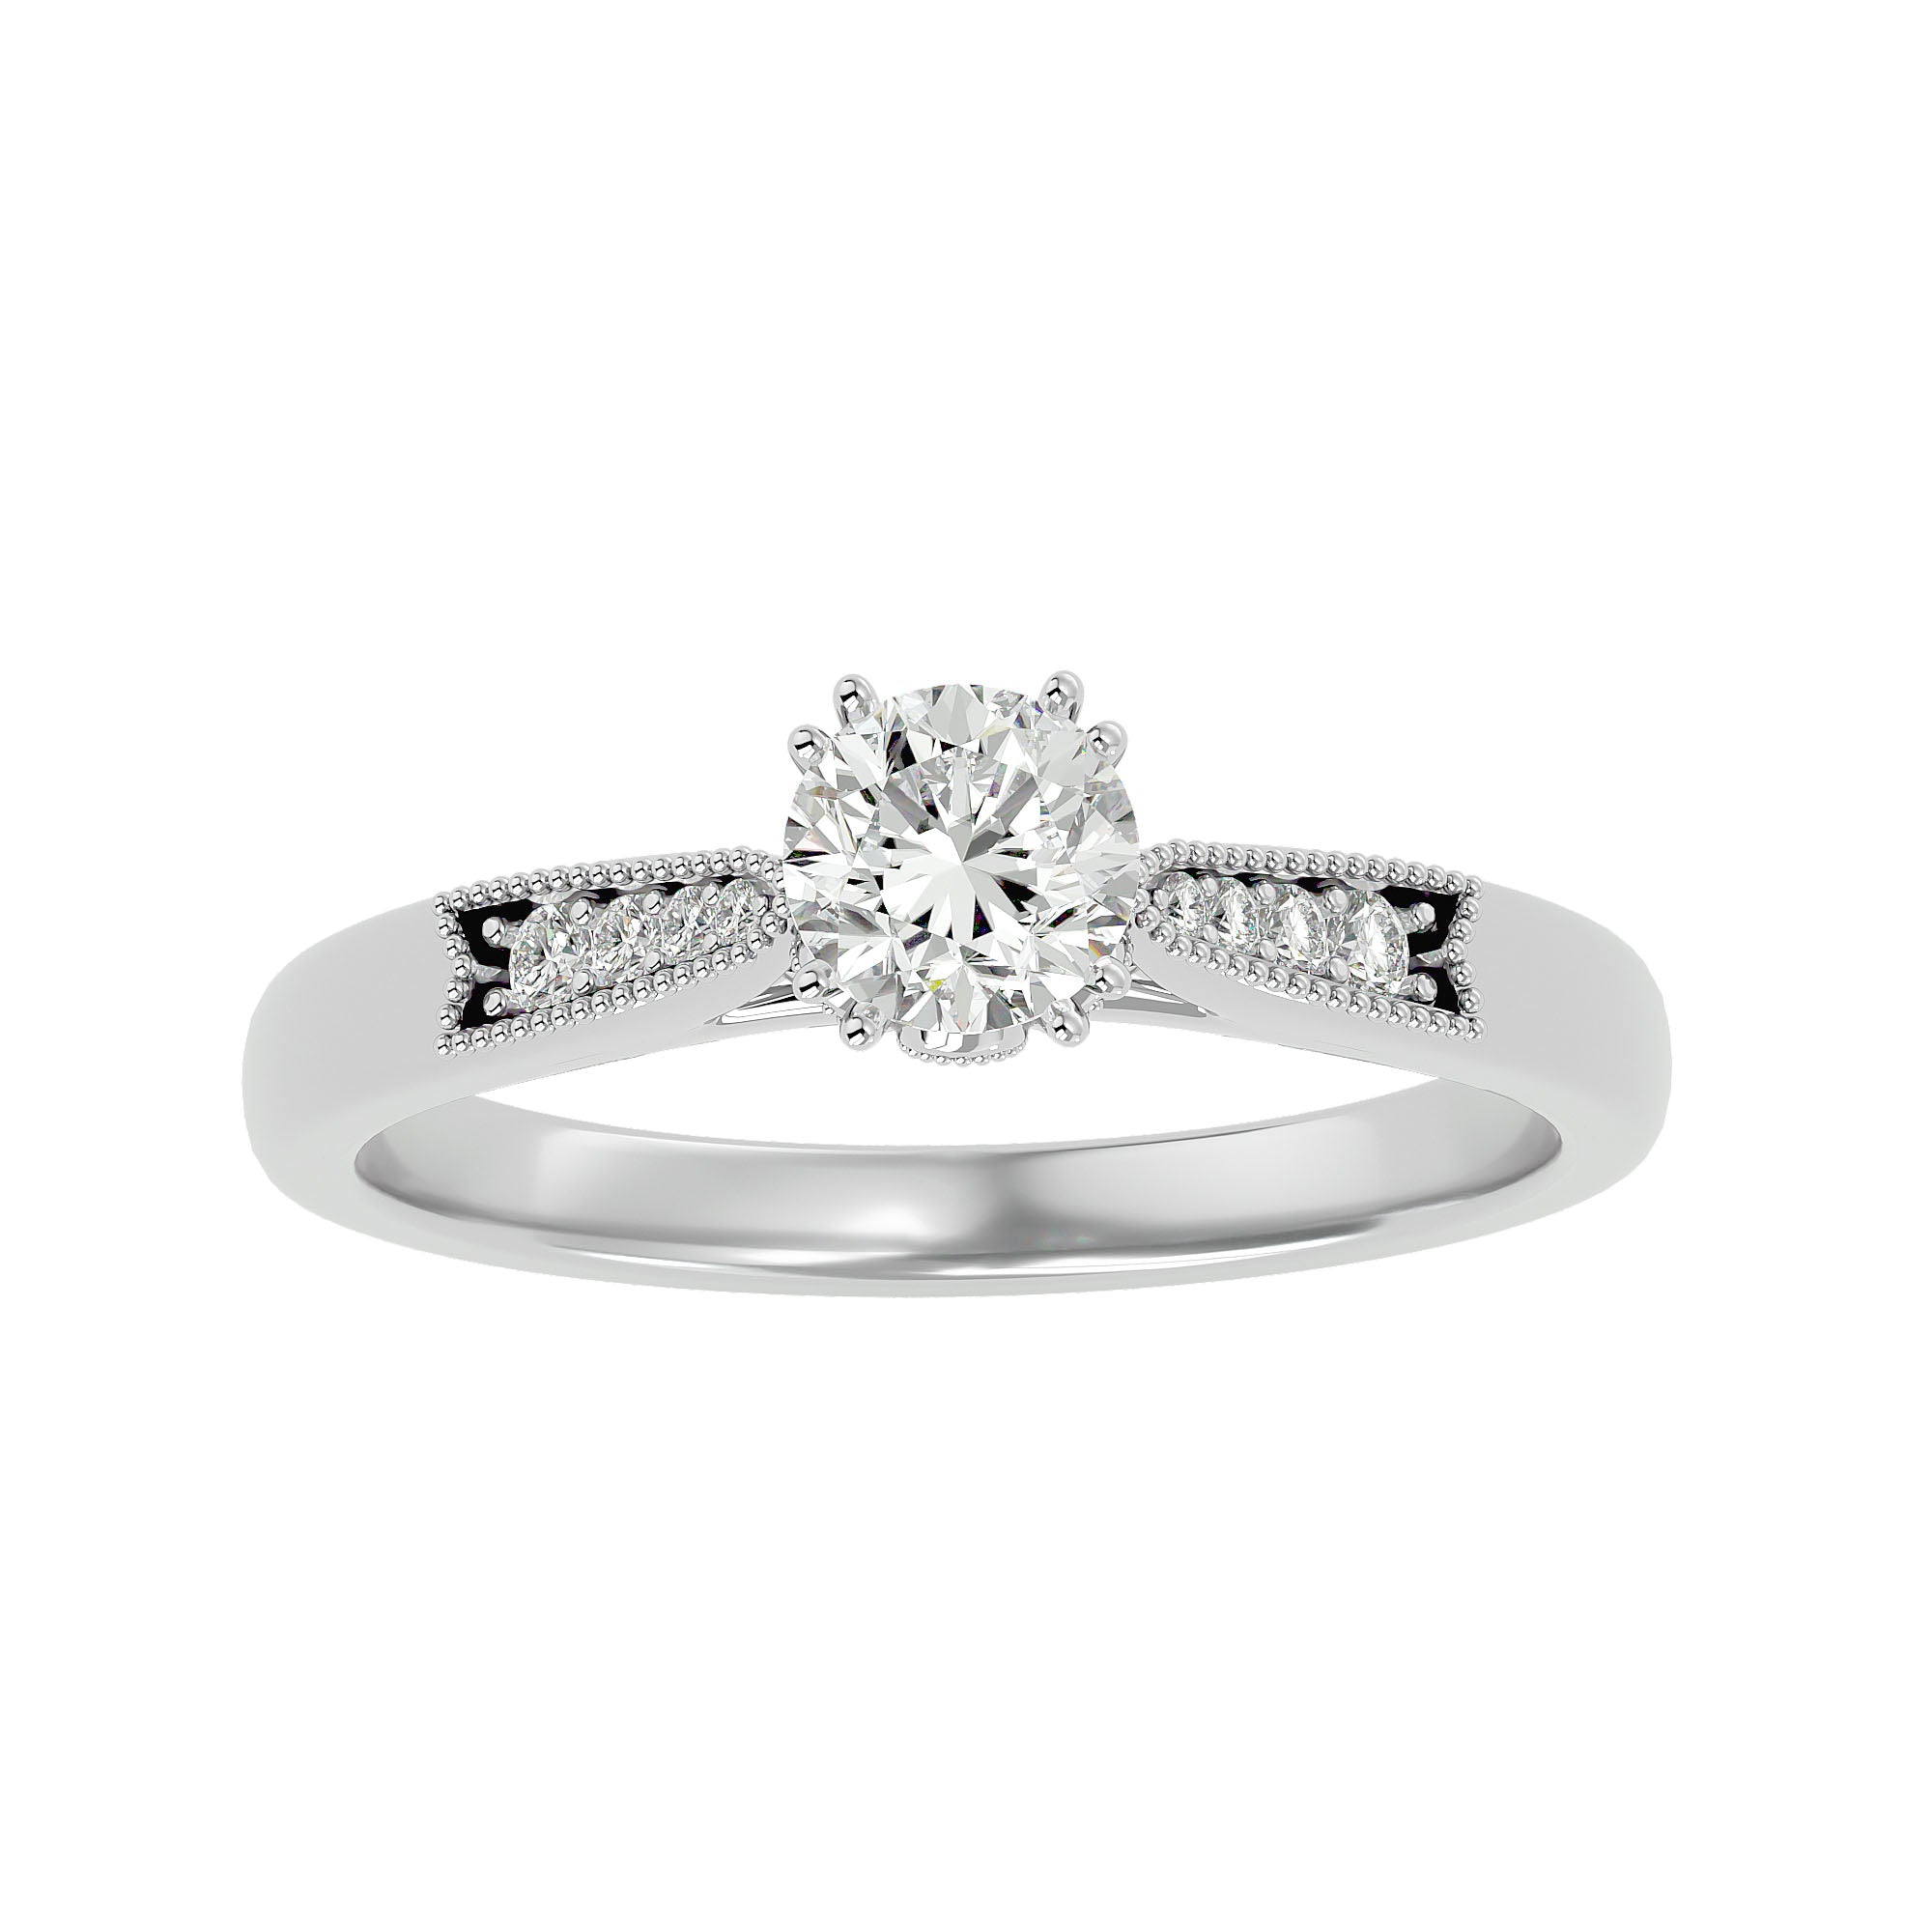 HOH Audrey Diamond Solitaire Ring